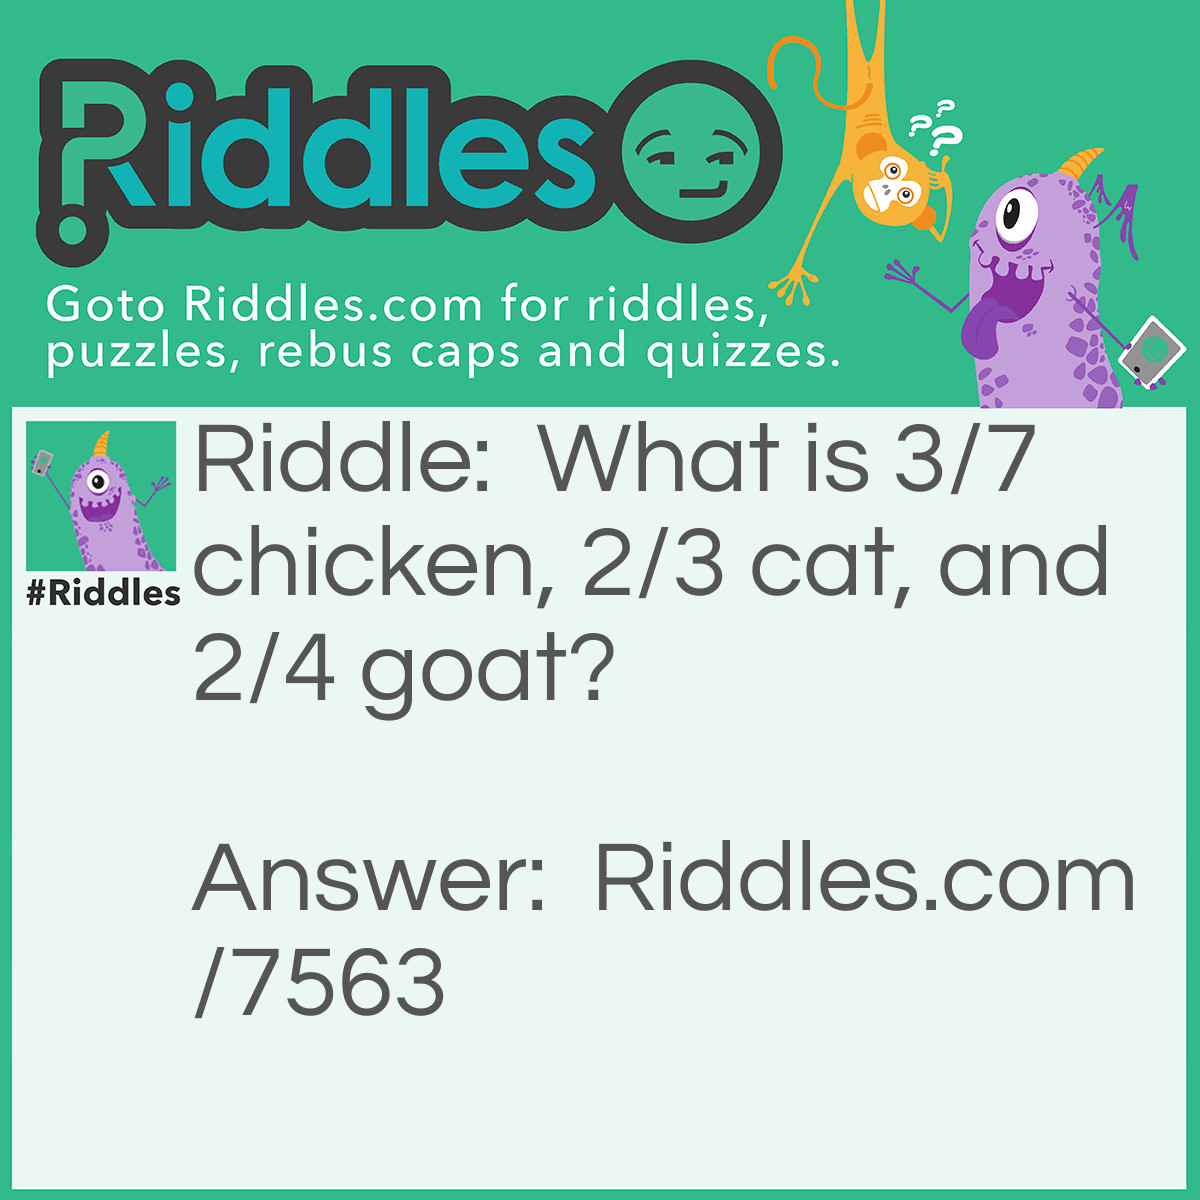 Riddle: What is 3/7 chicken, 2/3 cat, and 2/4 goat? Answer: Chicago.